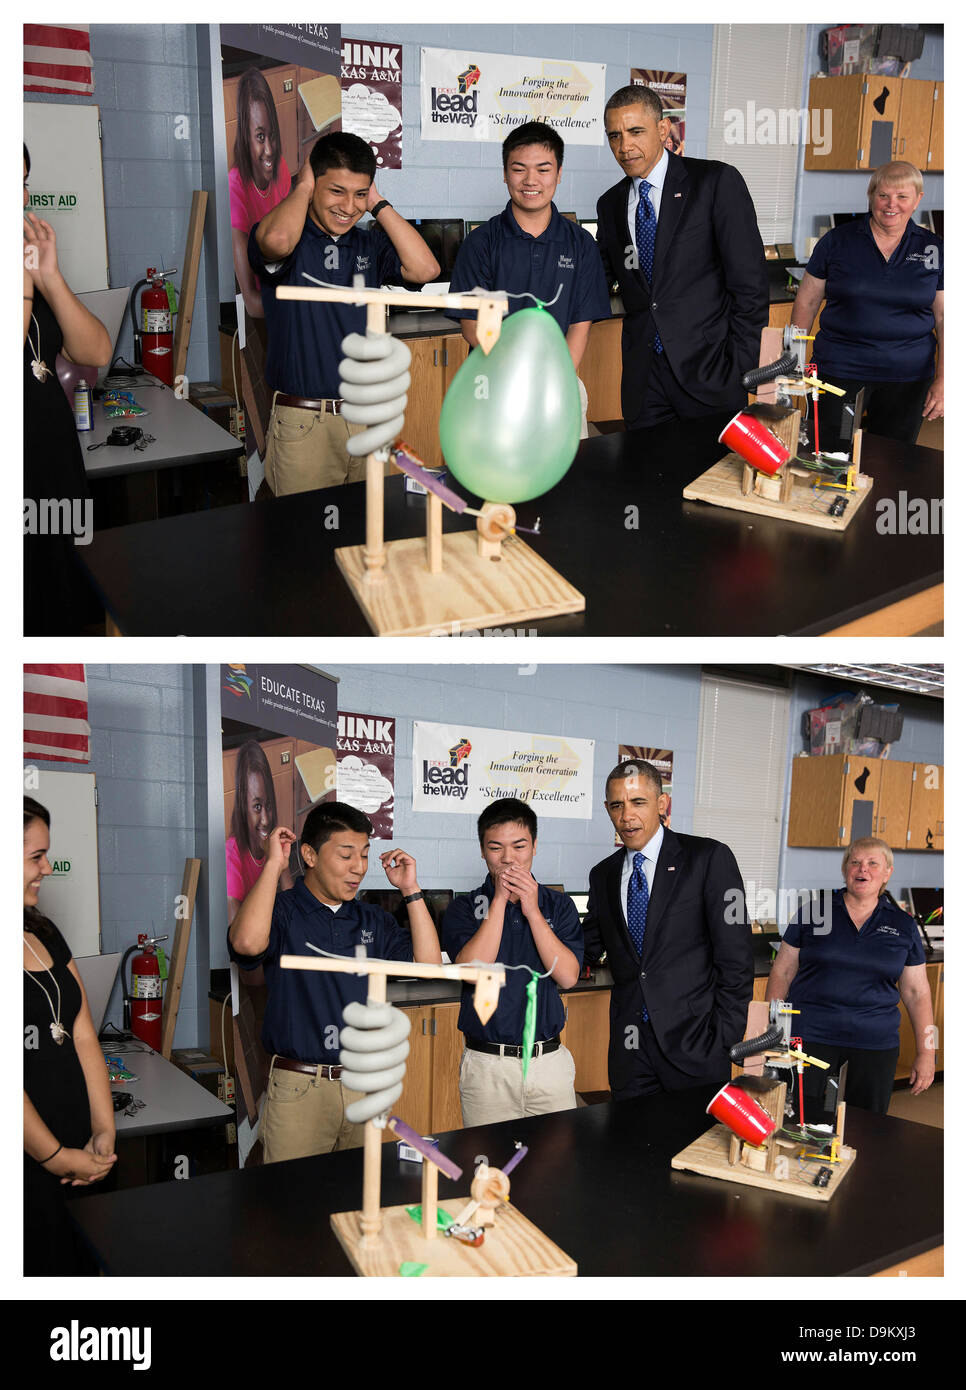 US President Barack Obama watches a demonstration by Oscar Perez and Bobford Do as he tours a classroom at Manor New Technology High School May 9, 2013 in Manor, Texas. Stock Photo